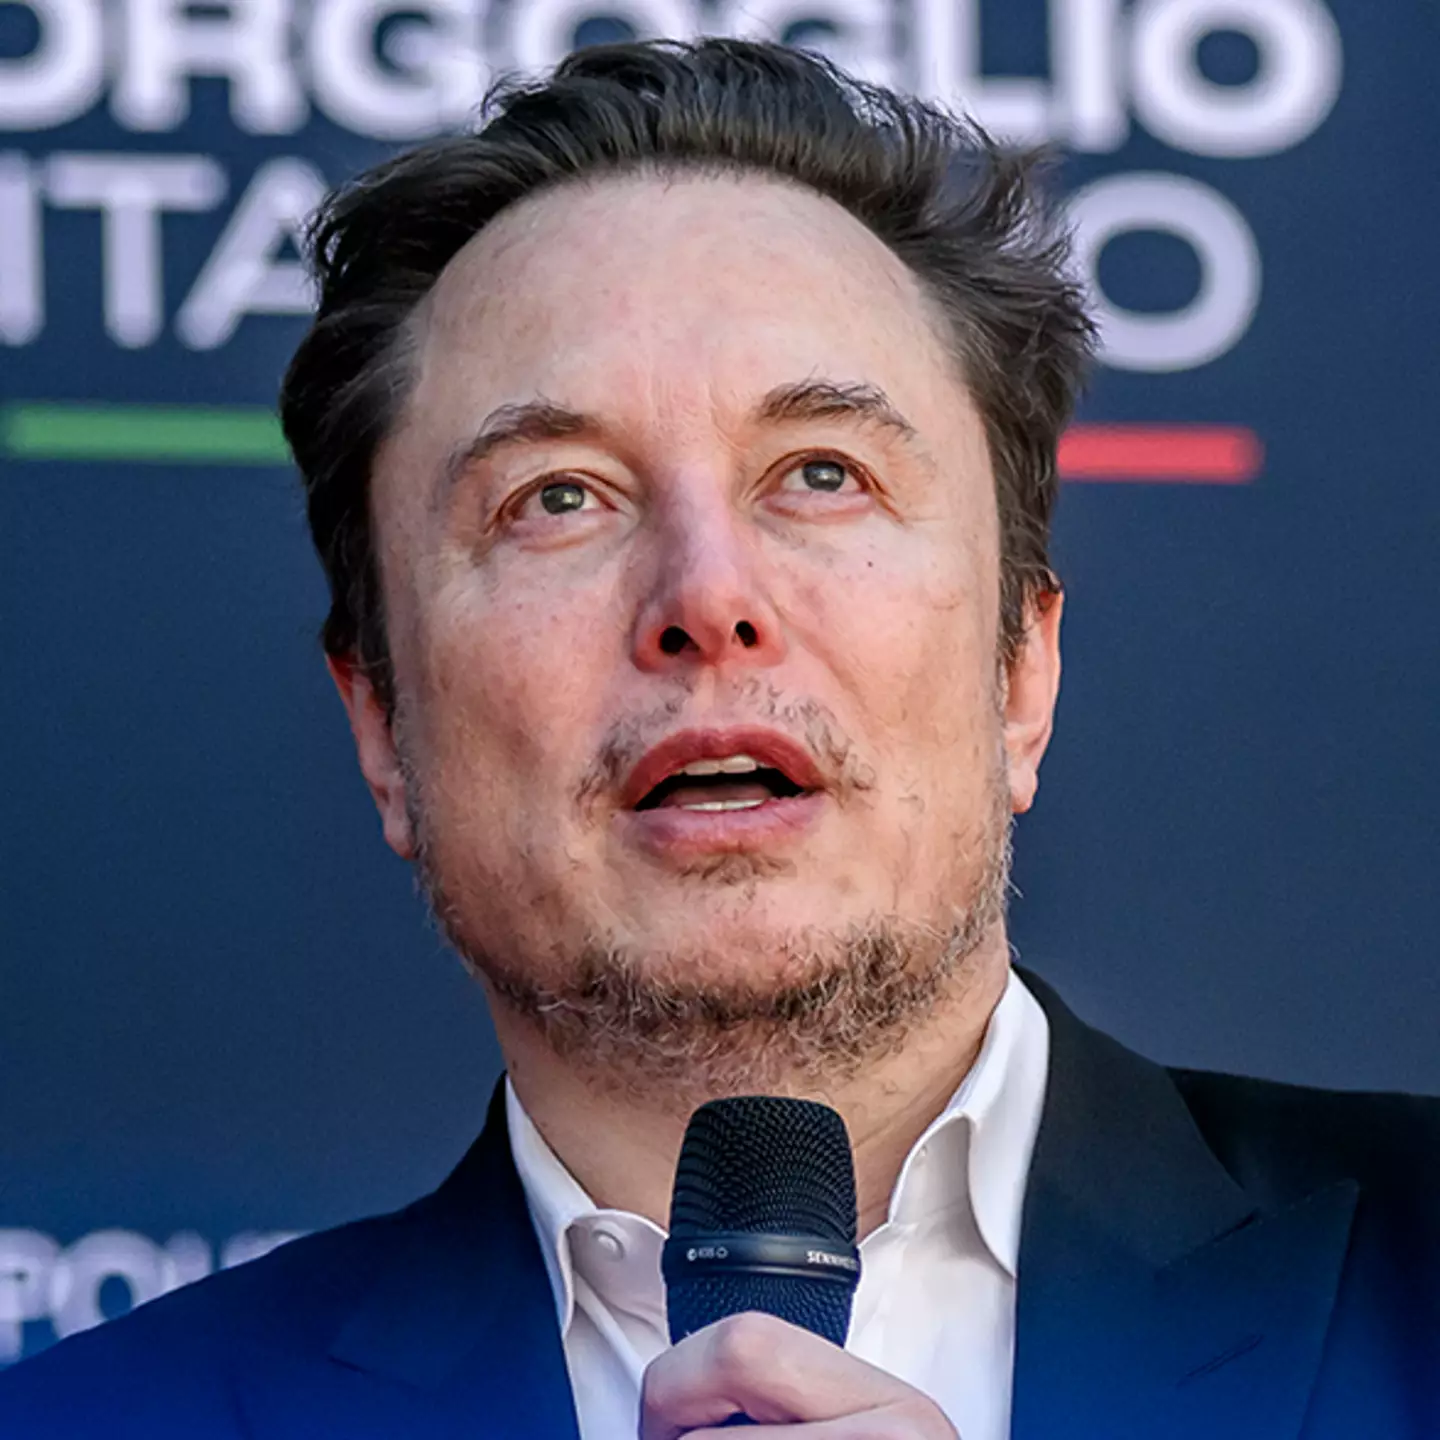 Elon Musk loses title as world's richest man